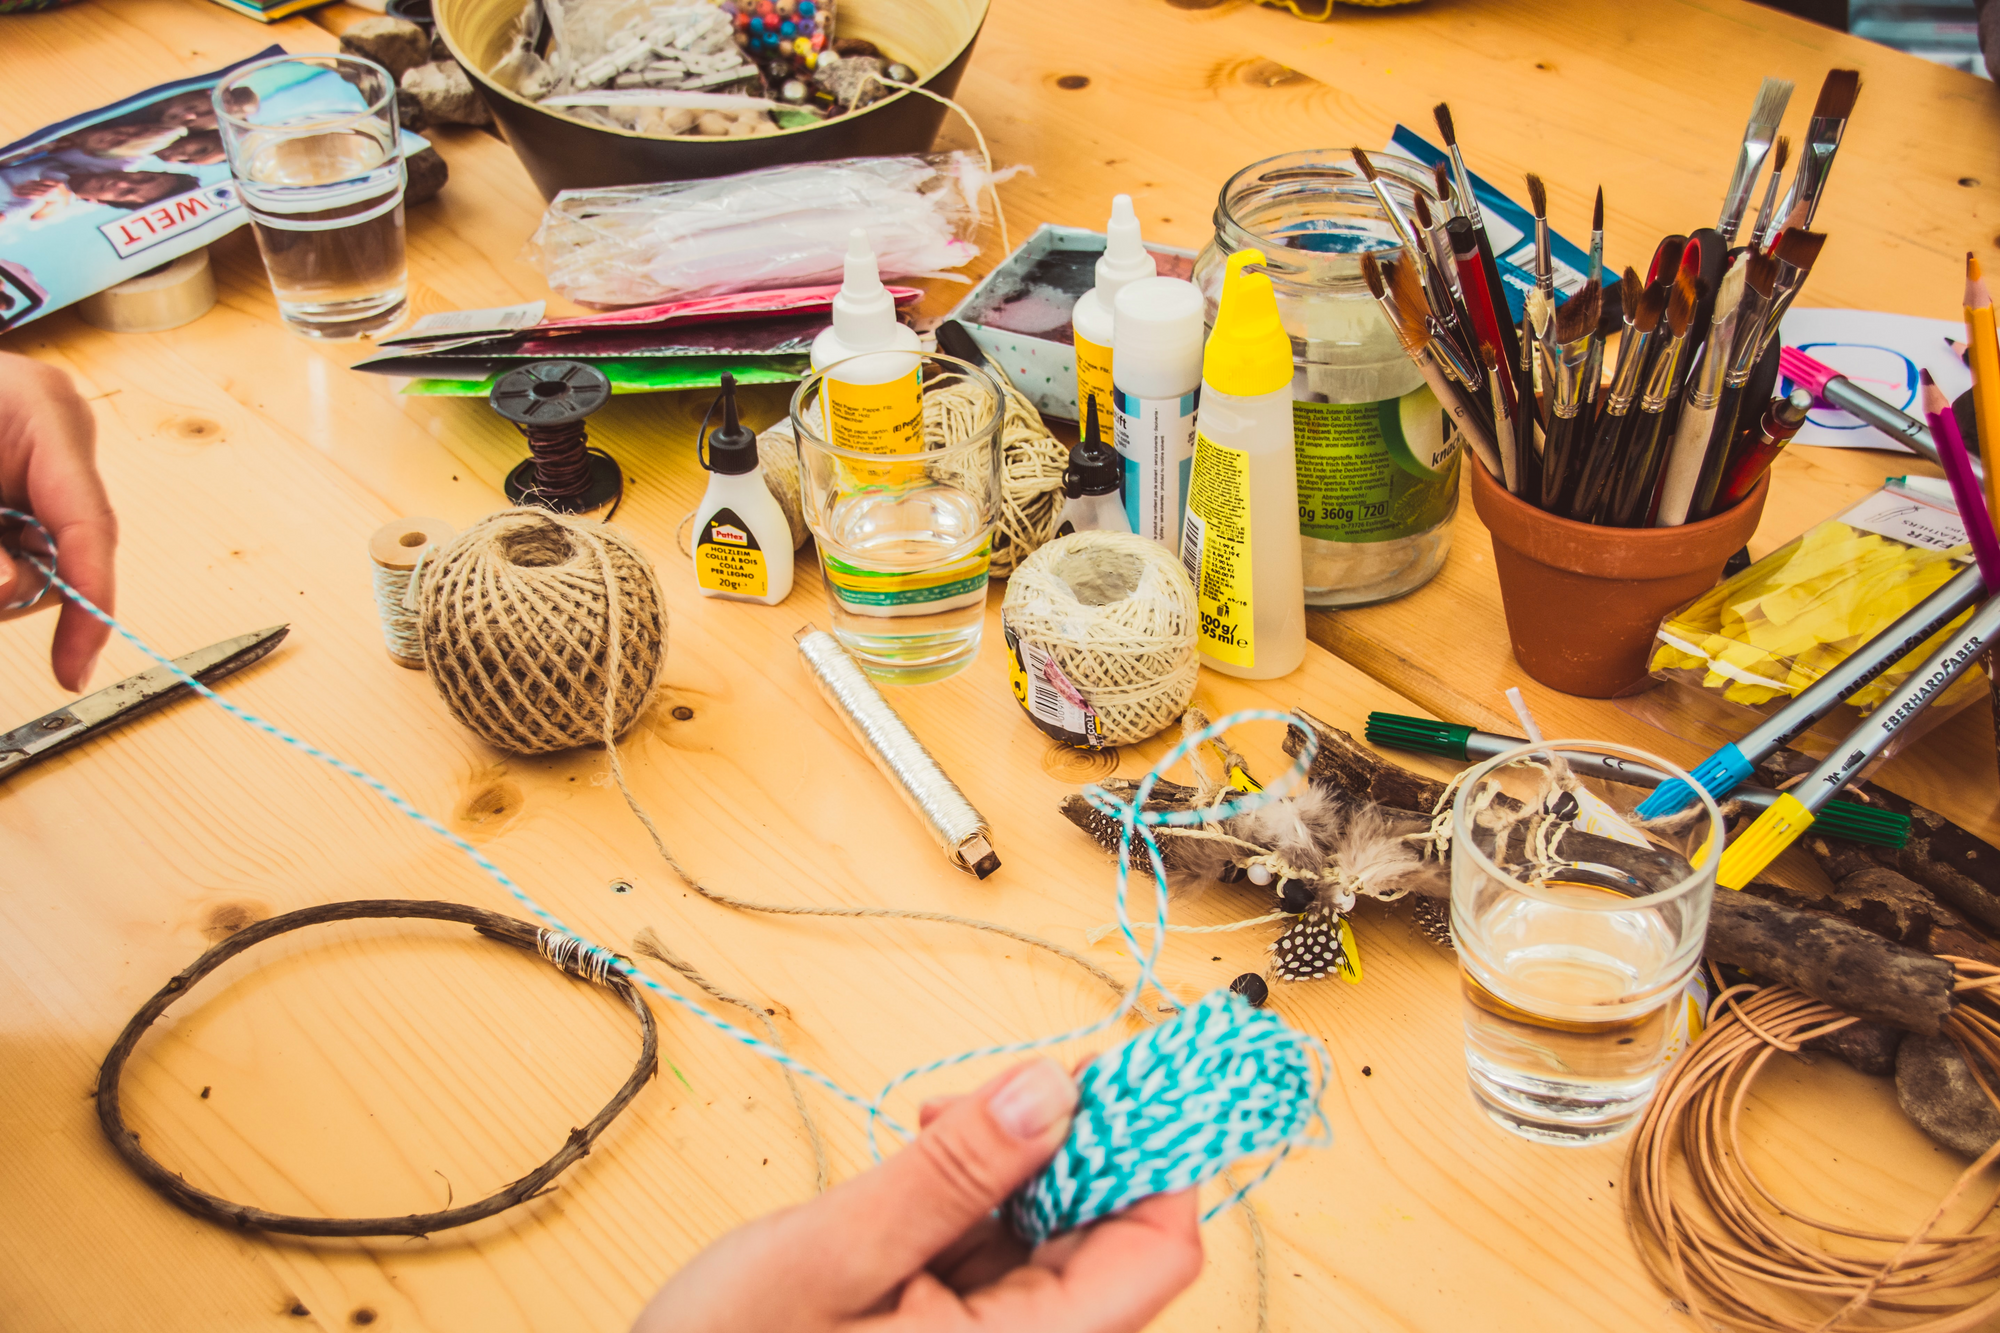 DIY projects as a me time activity can help you to take your mind off your work